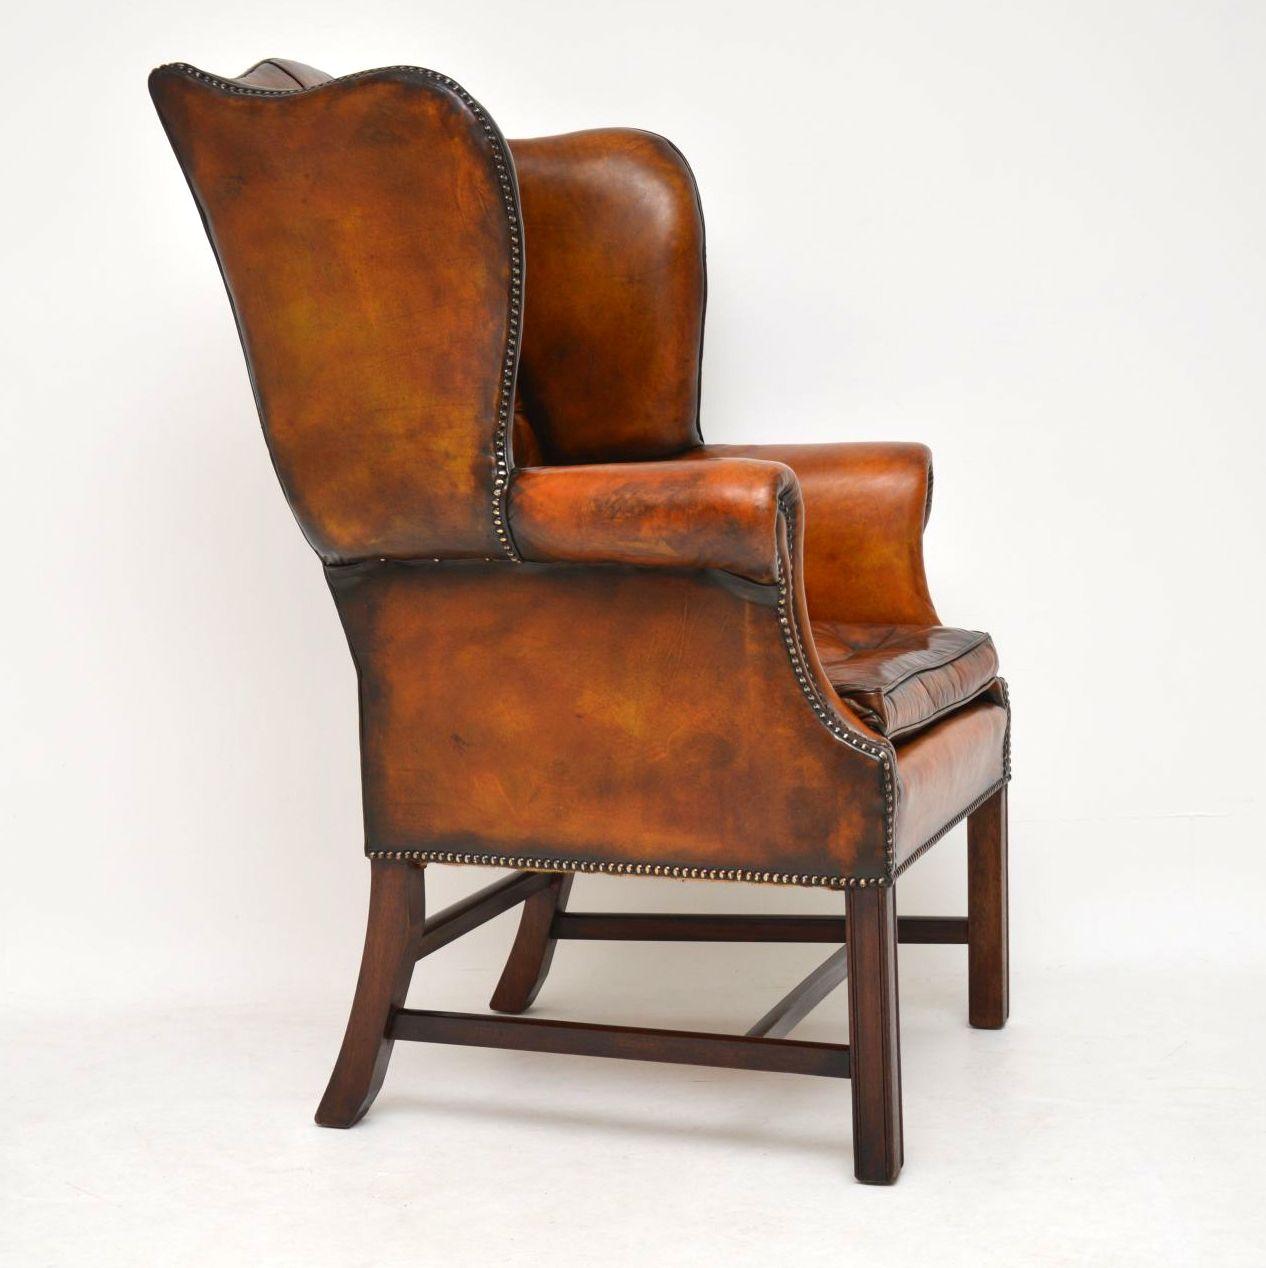 This antique deep buttoned leather wingback armchair has a wonderful shape and original color. It’s in excellent condition and has aged beautifully. Our leather specialist has just revived and polished the leather, so bringing out all the various